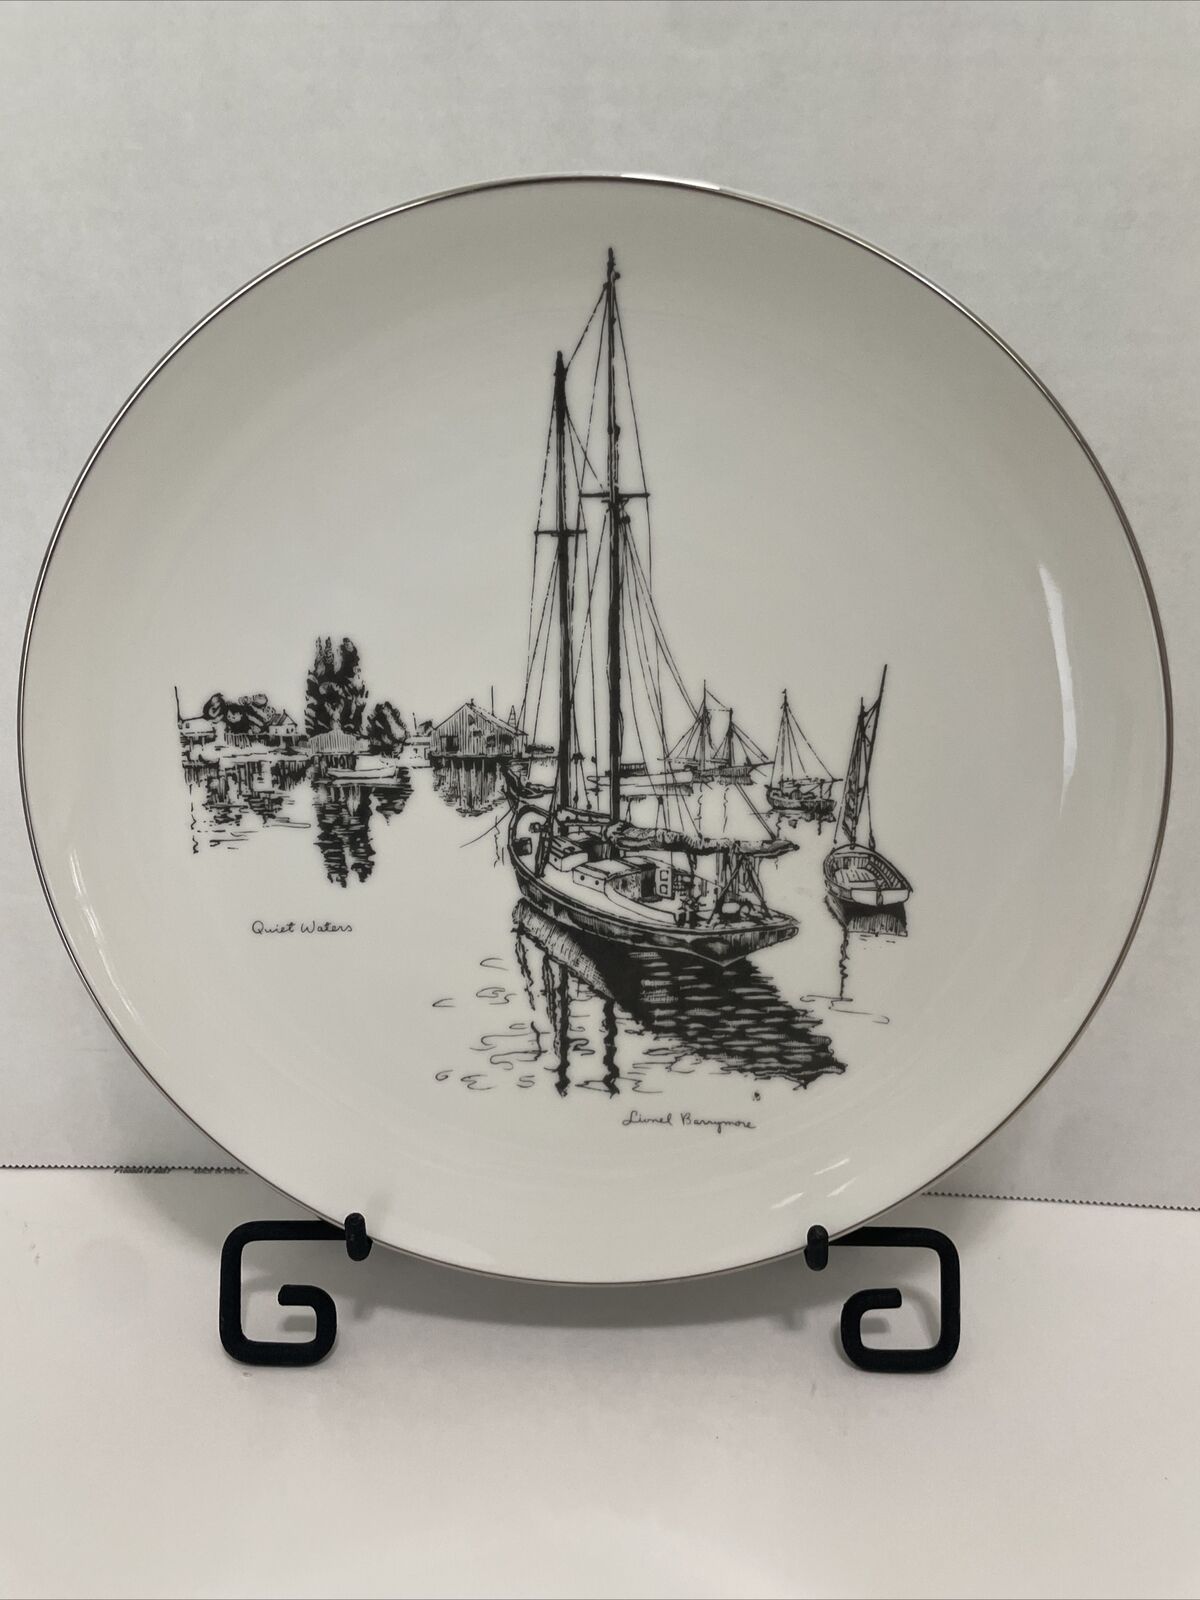 COLLECTOR PLATE LIONEL BARRYMORE's QUIET WATERS,  LIMITED ED., GORHAM FINE CHINA